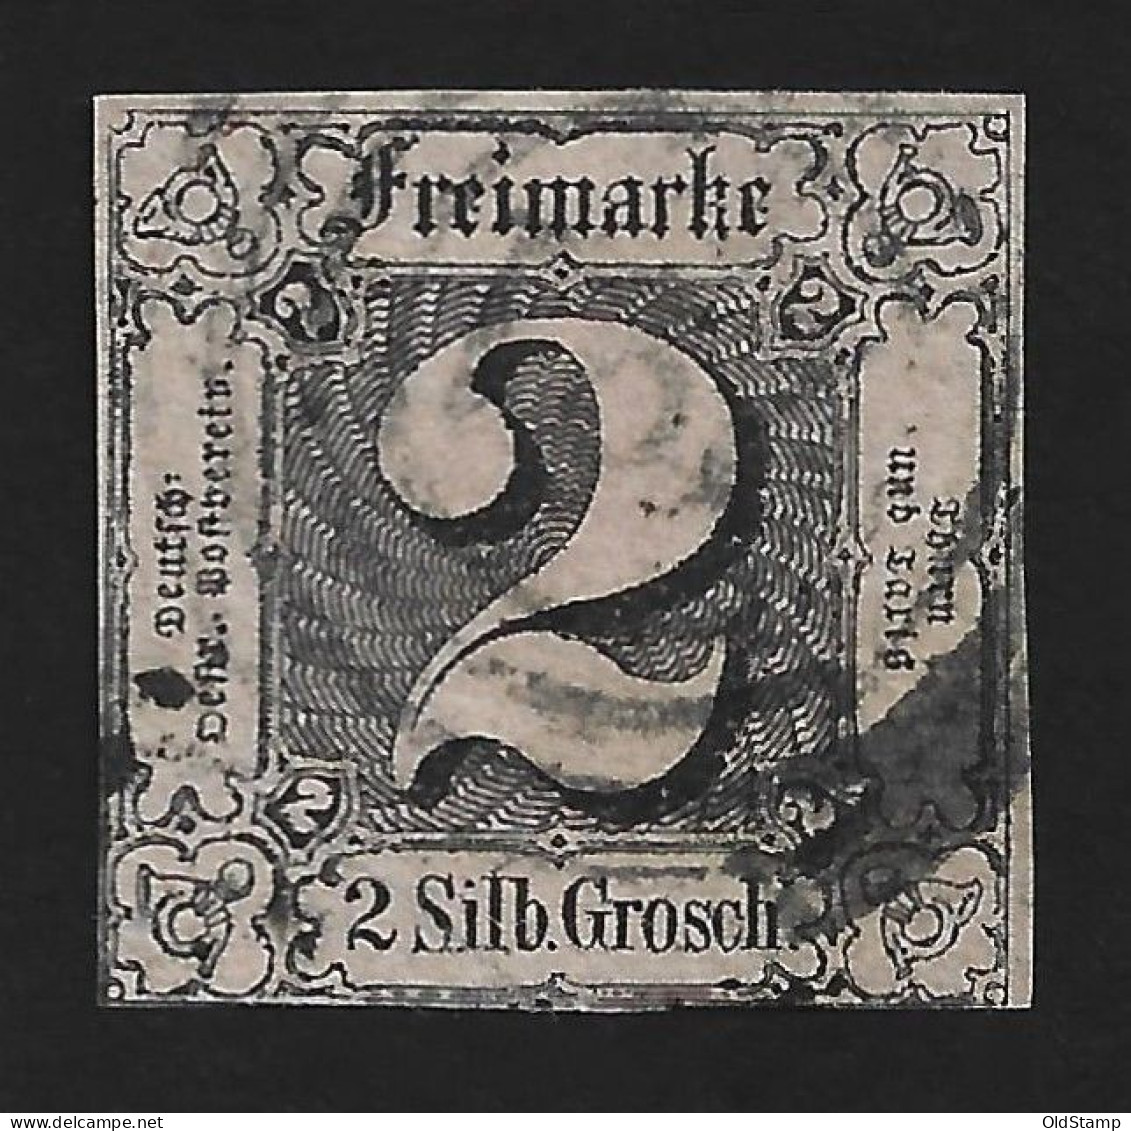 THURN Und TAXIS 1852 Mi.# 5 BPP Signed 4-Ring Gestempelt / Allemagne Alemania Altdeutschland Old Germany States - Afgestempeld